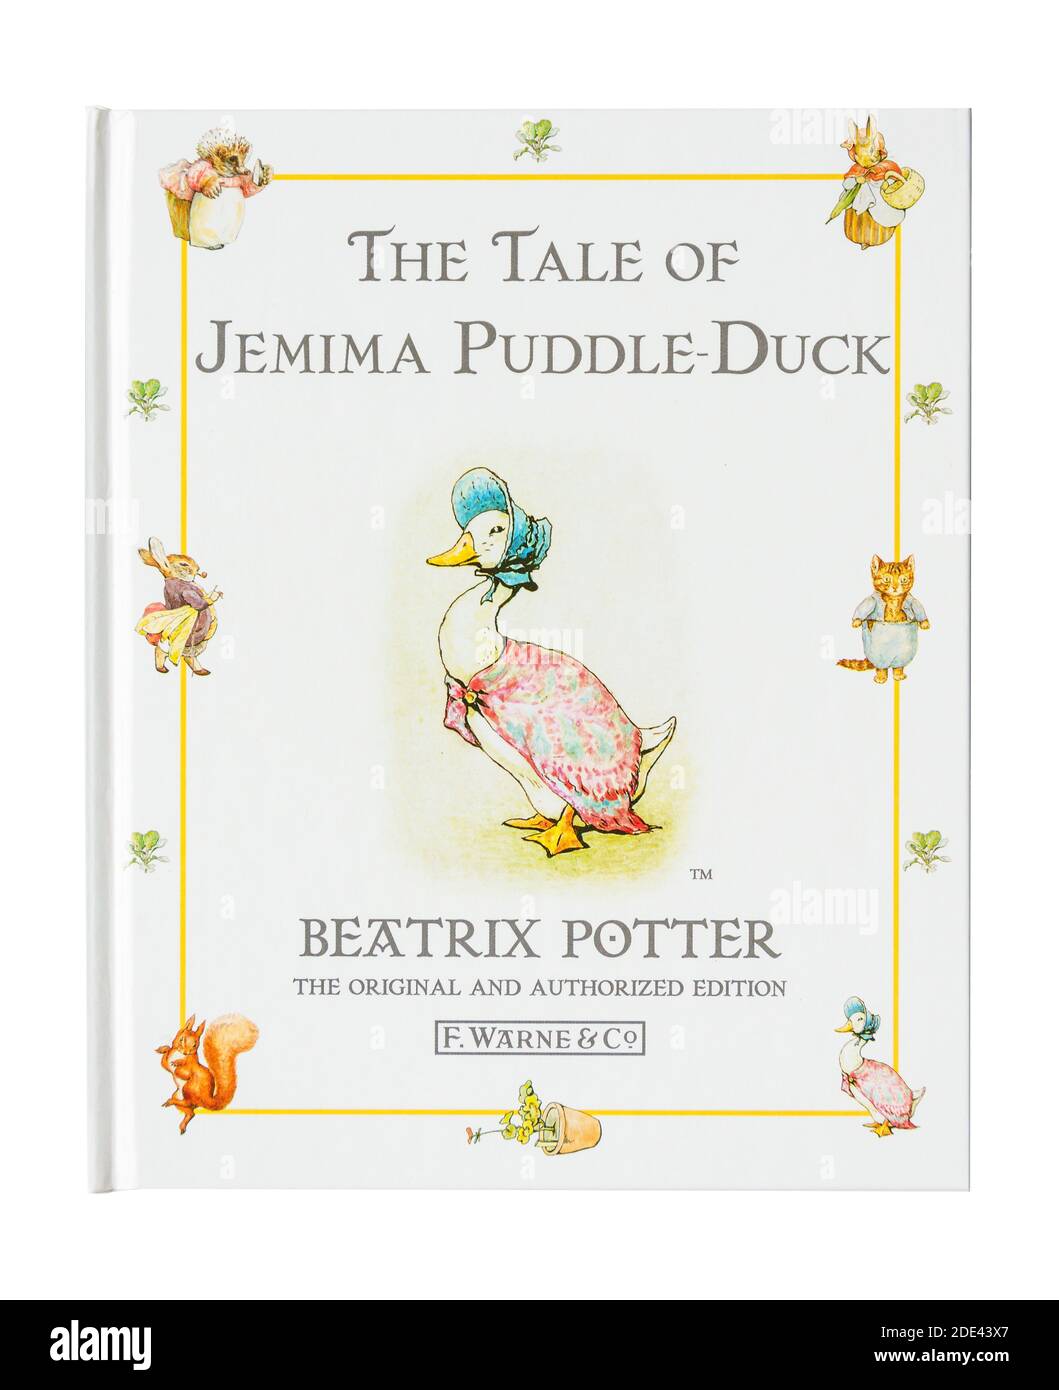 'The Tale of Jemima Puddle-Duck' children's book by Beatrix Potter, Greater London, England, United Kingdom Stock Photo